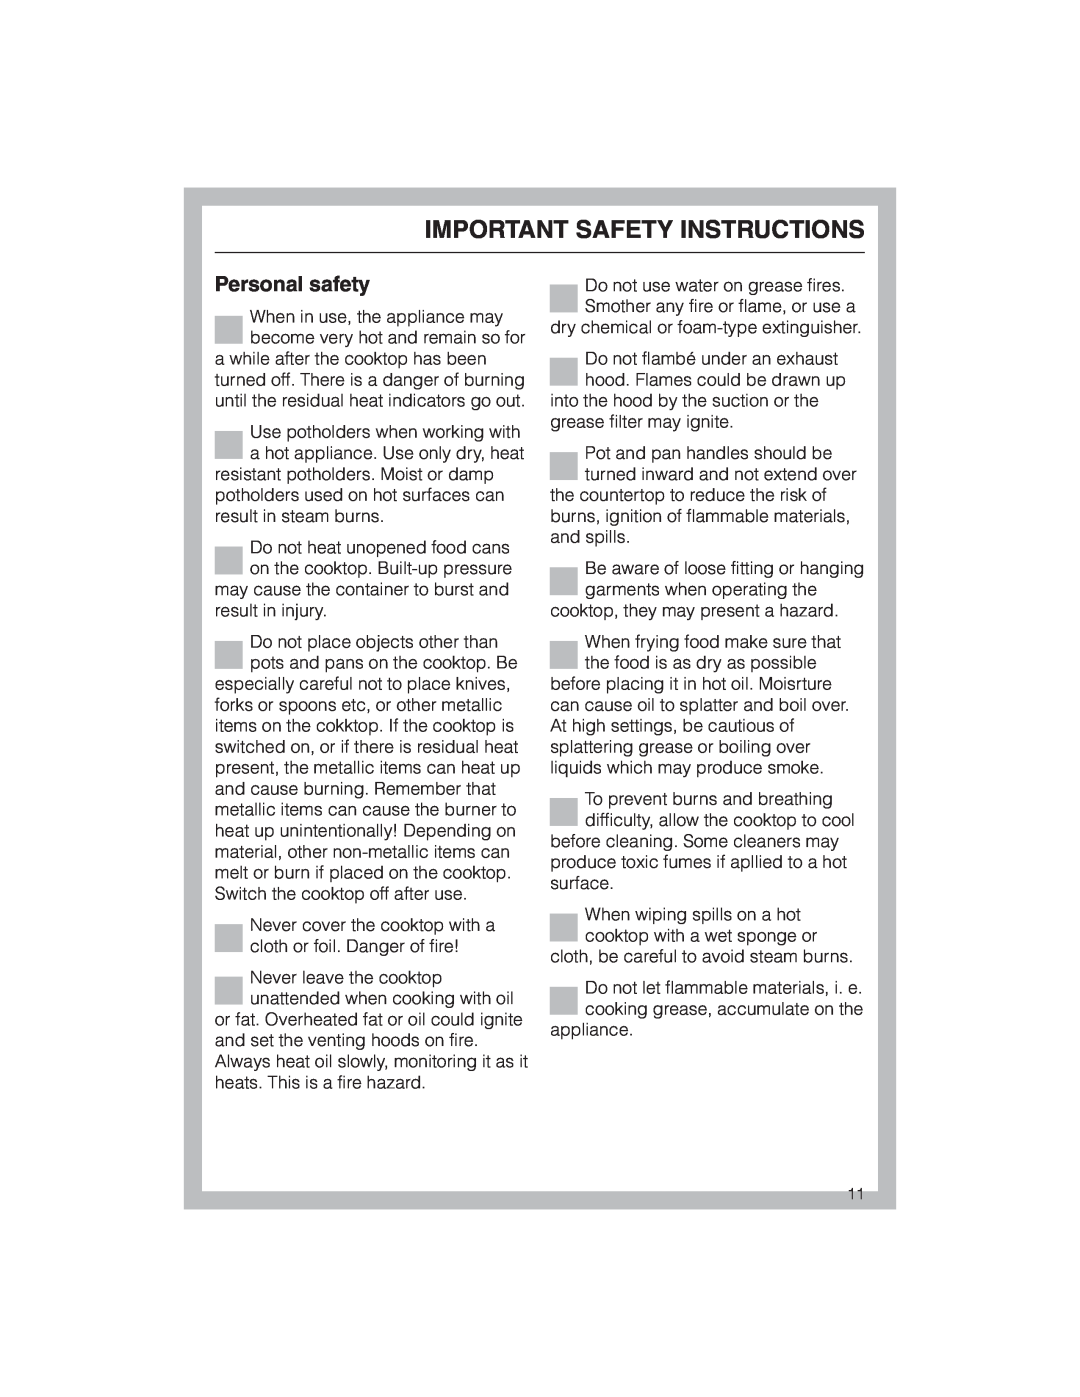 Miele KM 5773 installation instructions Personal safety, Important Safety Instructions 